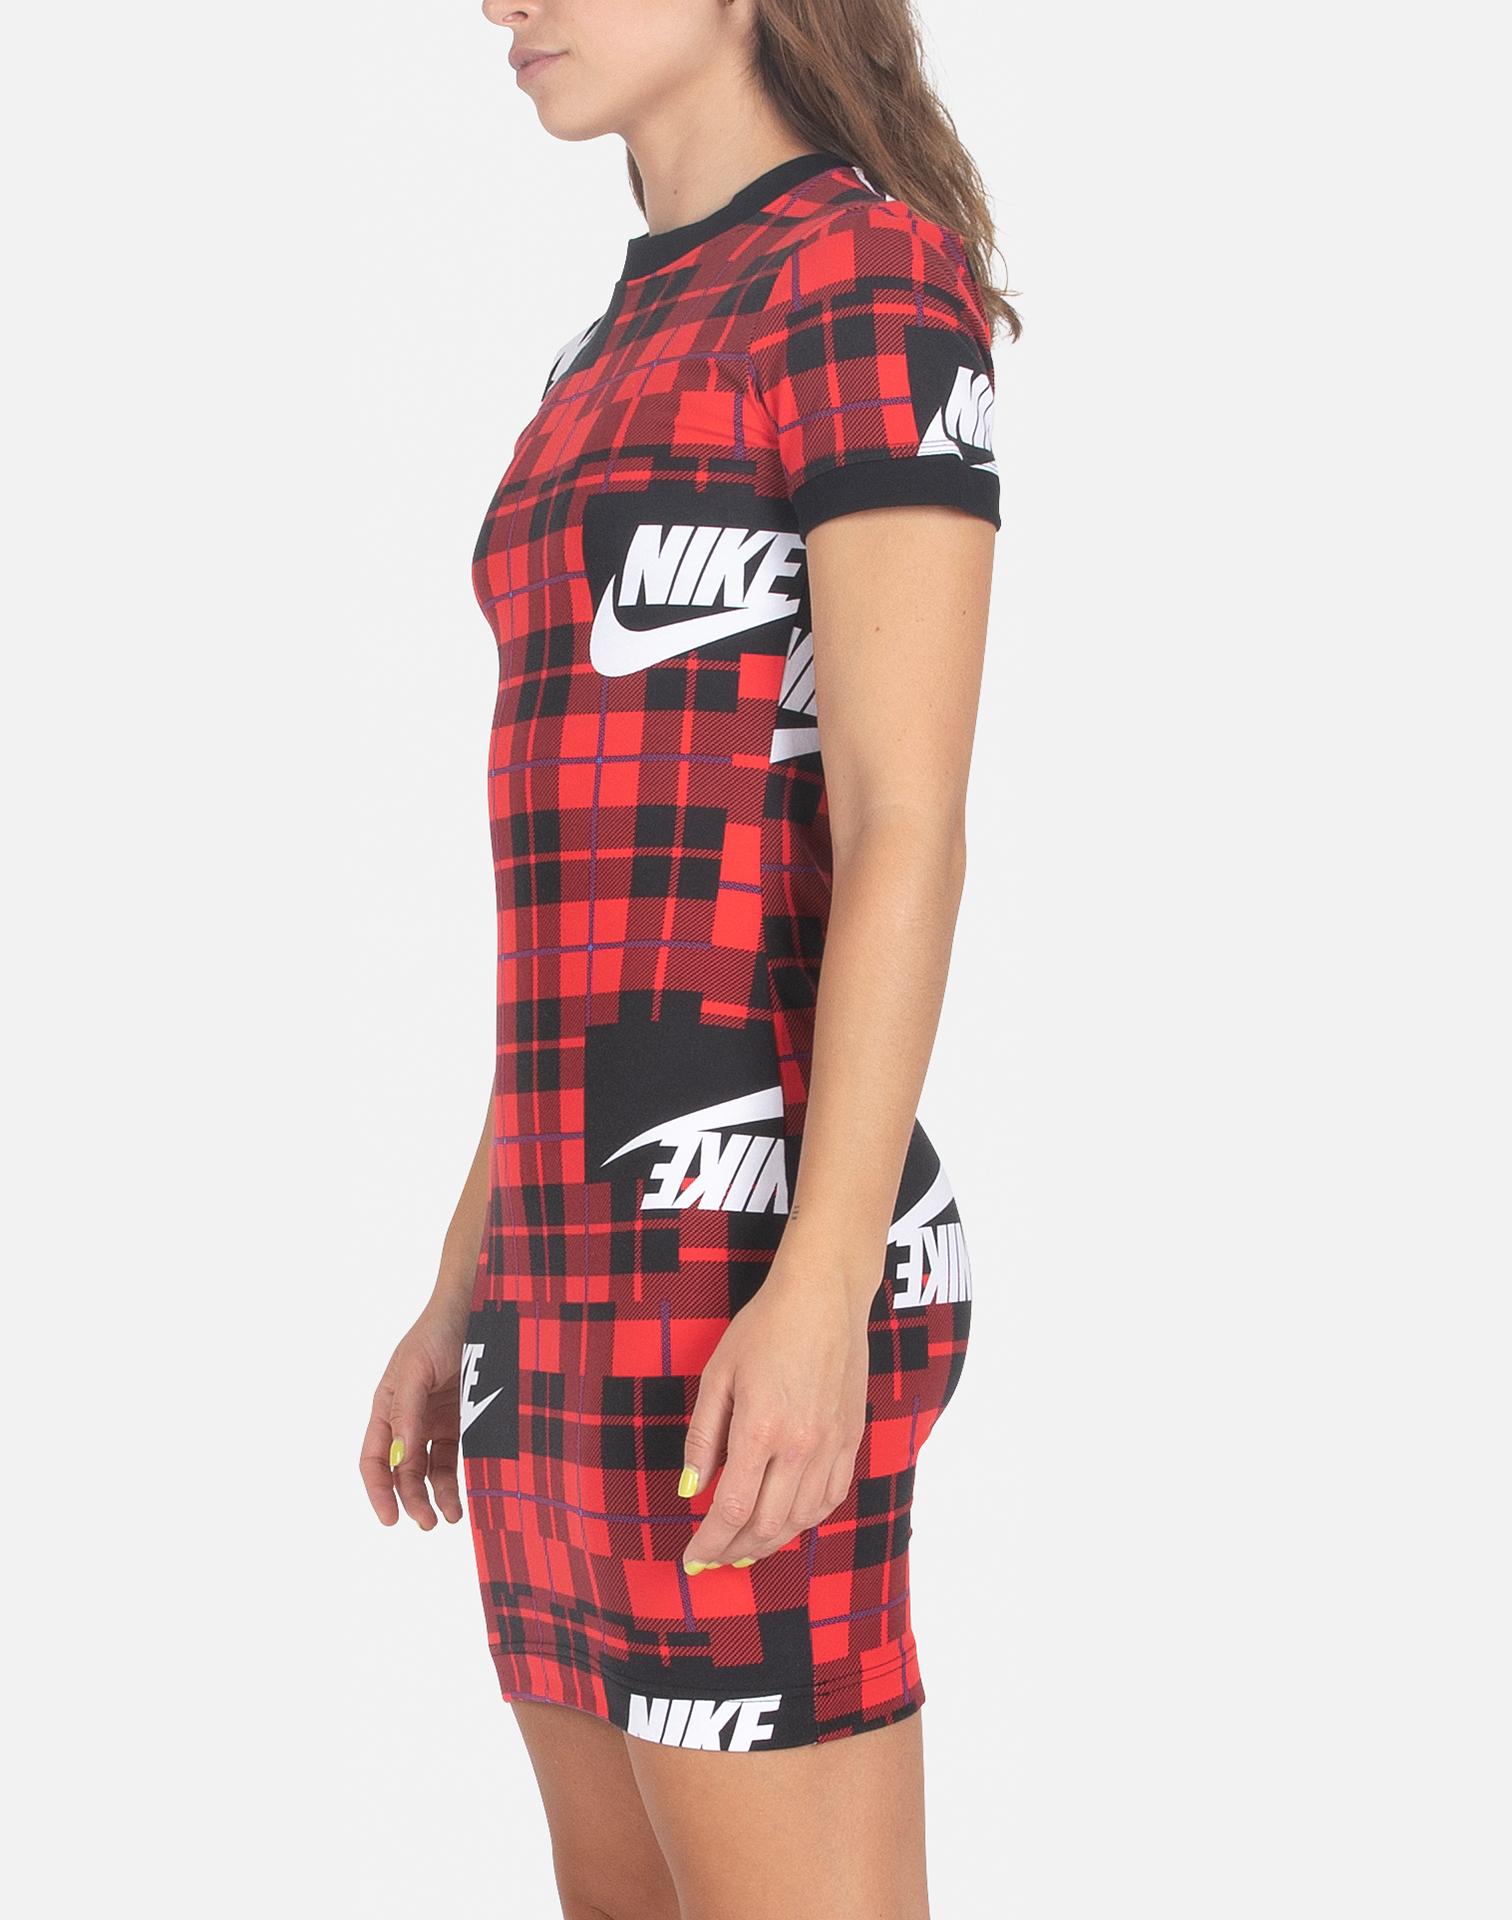 Nike Yellow Plaid Dress Store, SAVE 48% - aveclumiere.com